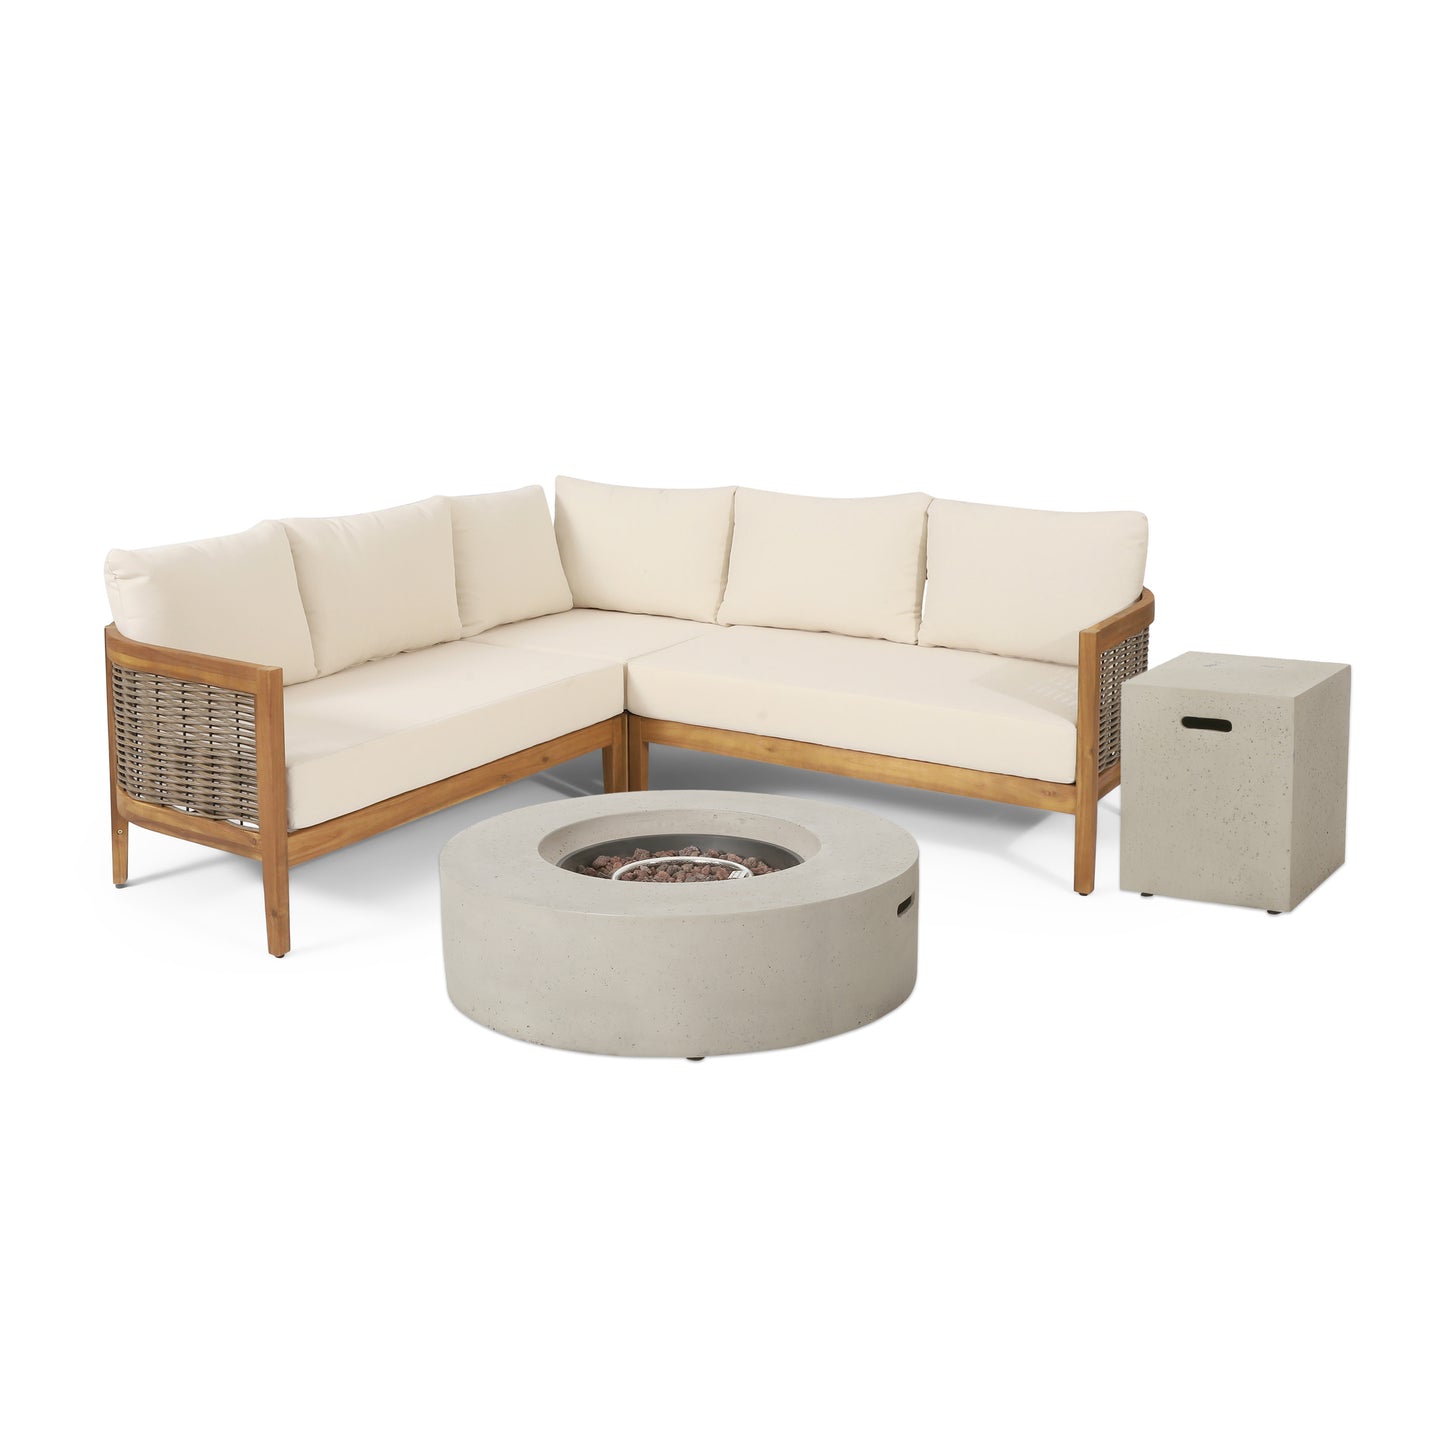 The Crowne Collection Outdoor Acacia Wood and Round Wicker 5 Seater Sectional Sofa Chat Set with Fire Pit